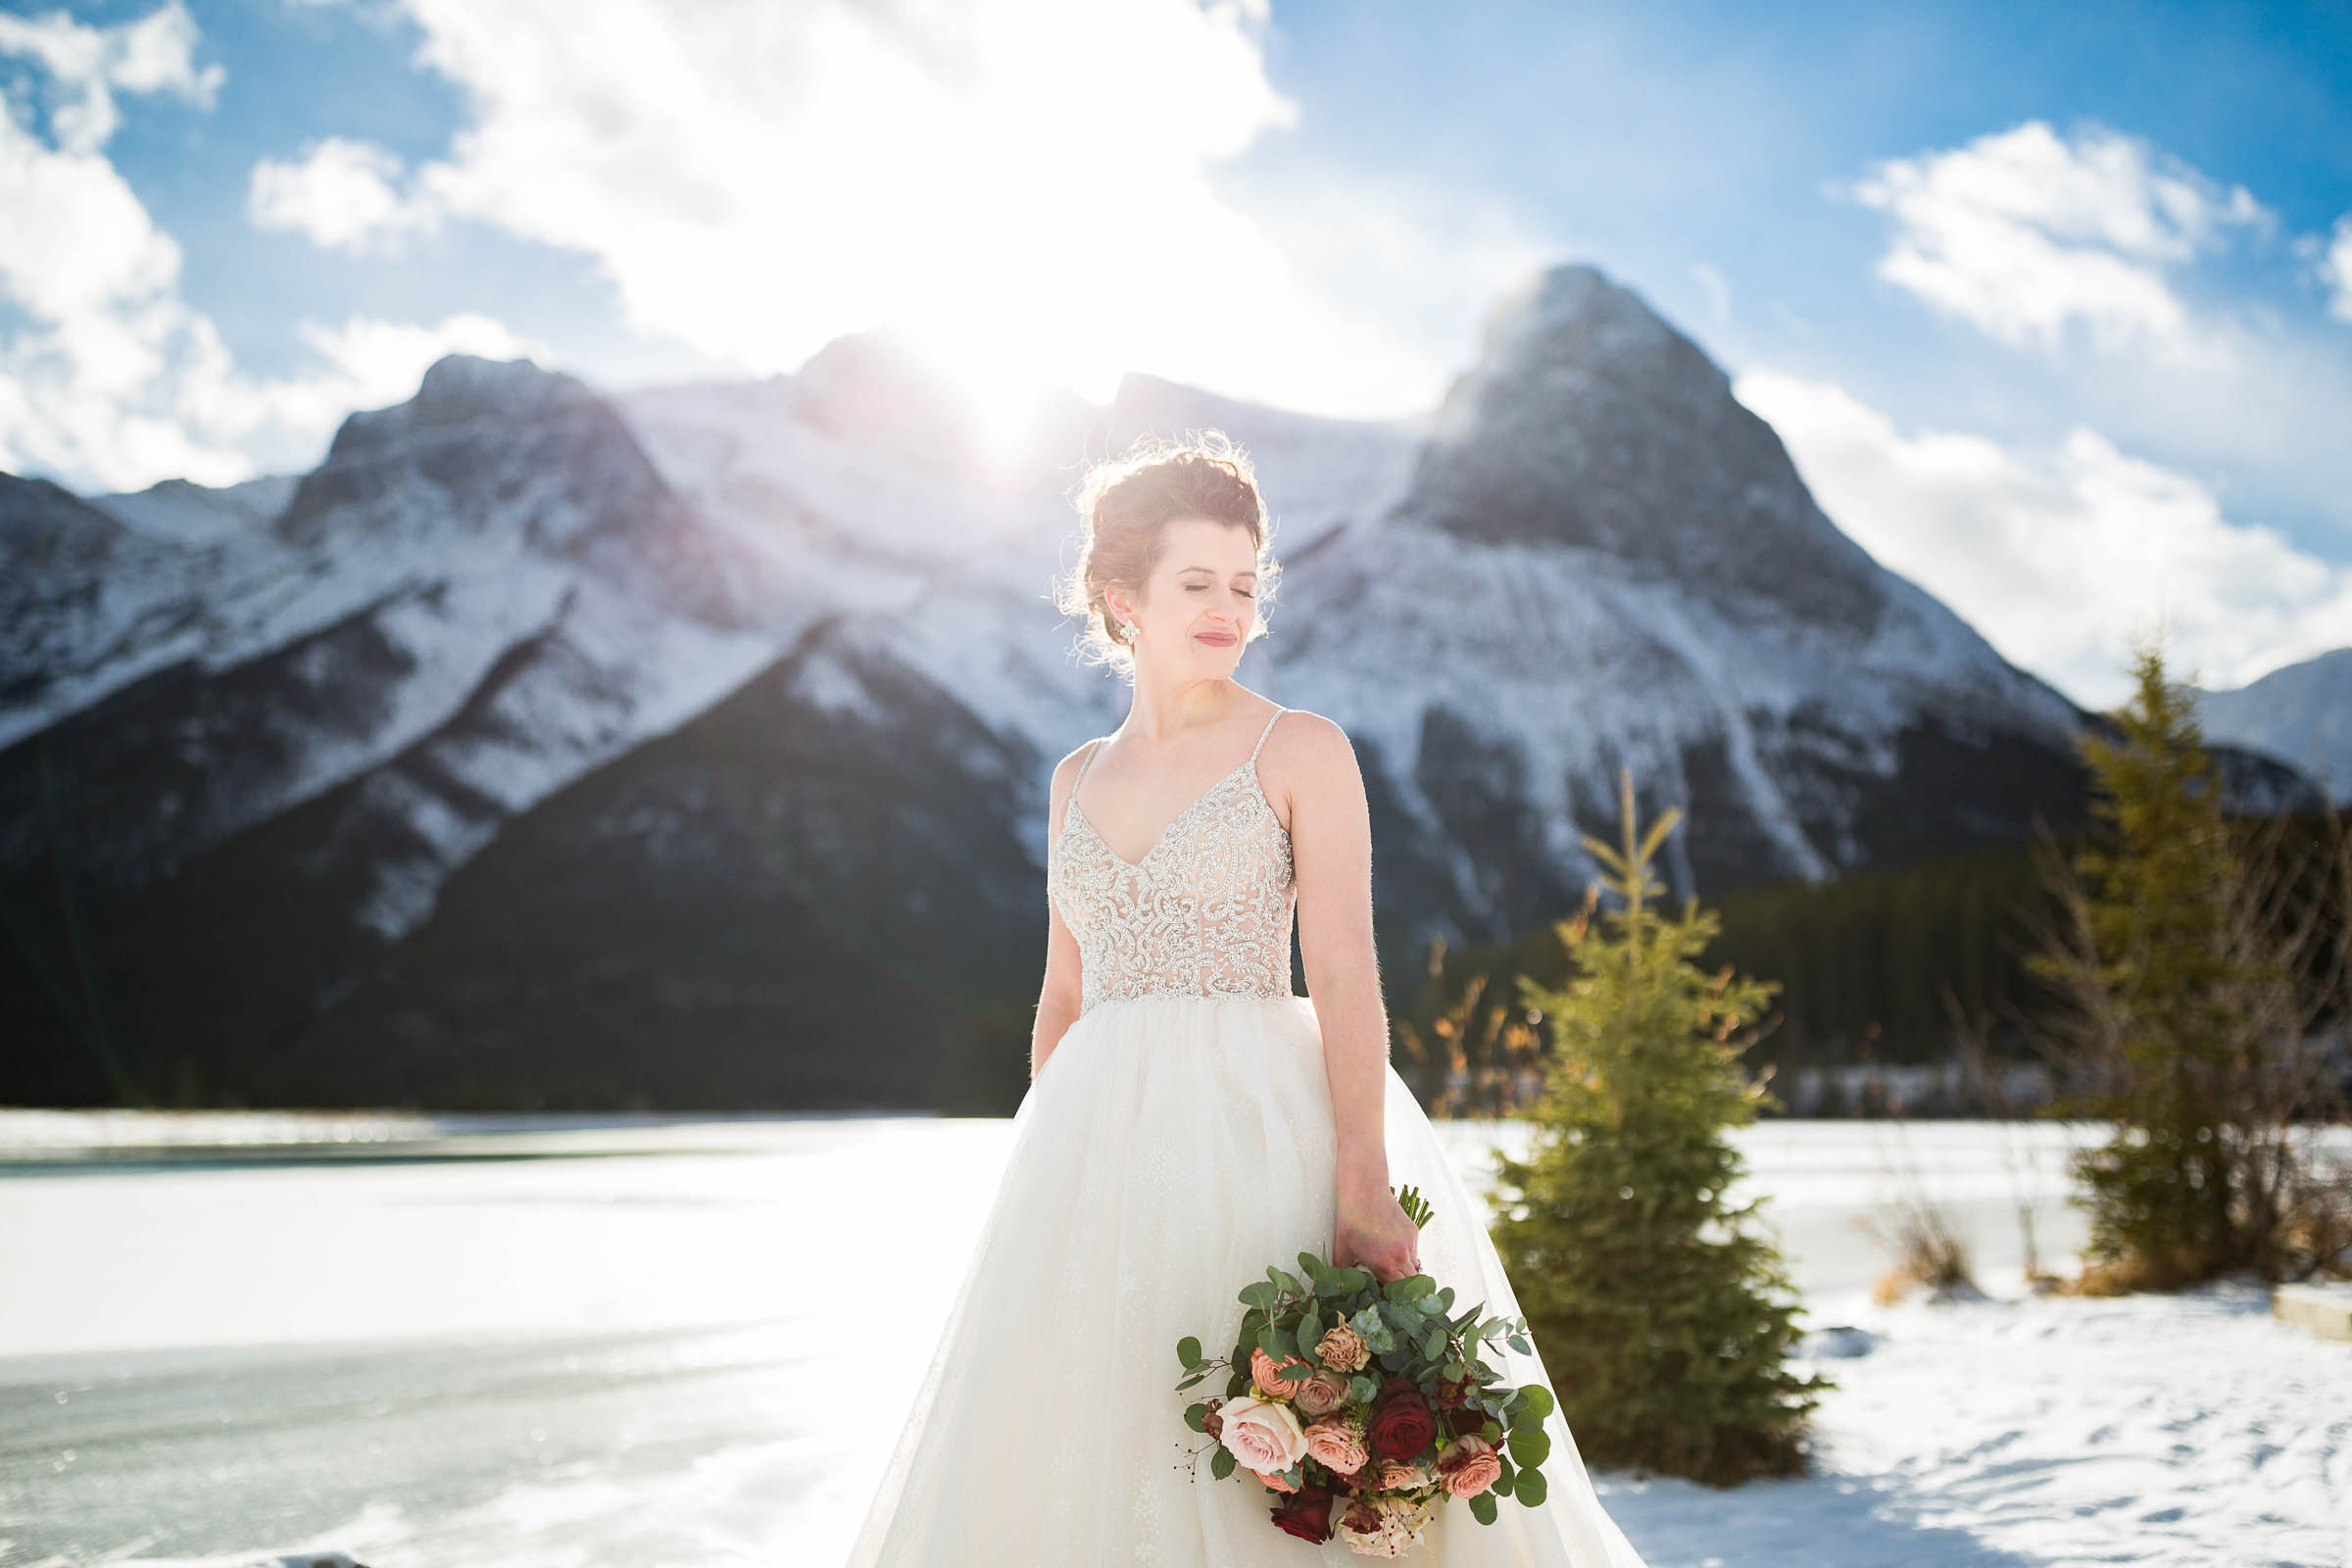 Bride in princess style wedding gown, holding bouquet at her side, in front of mountain backdrop